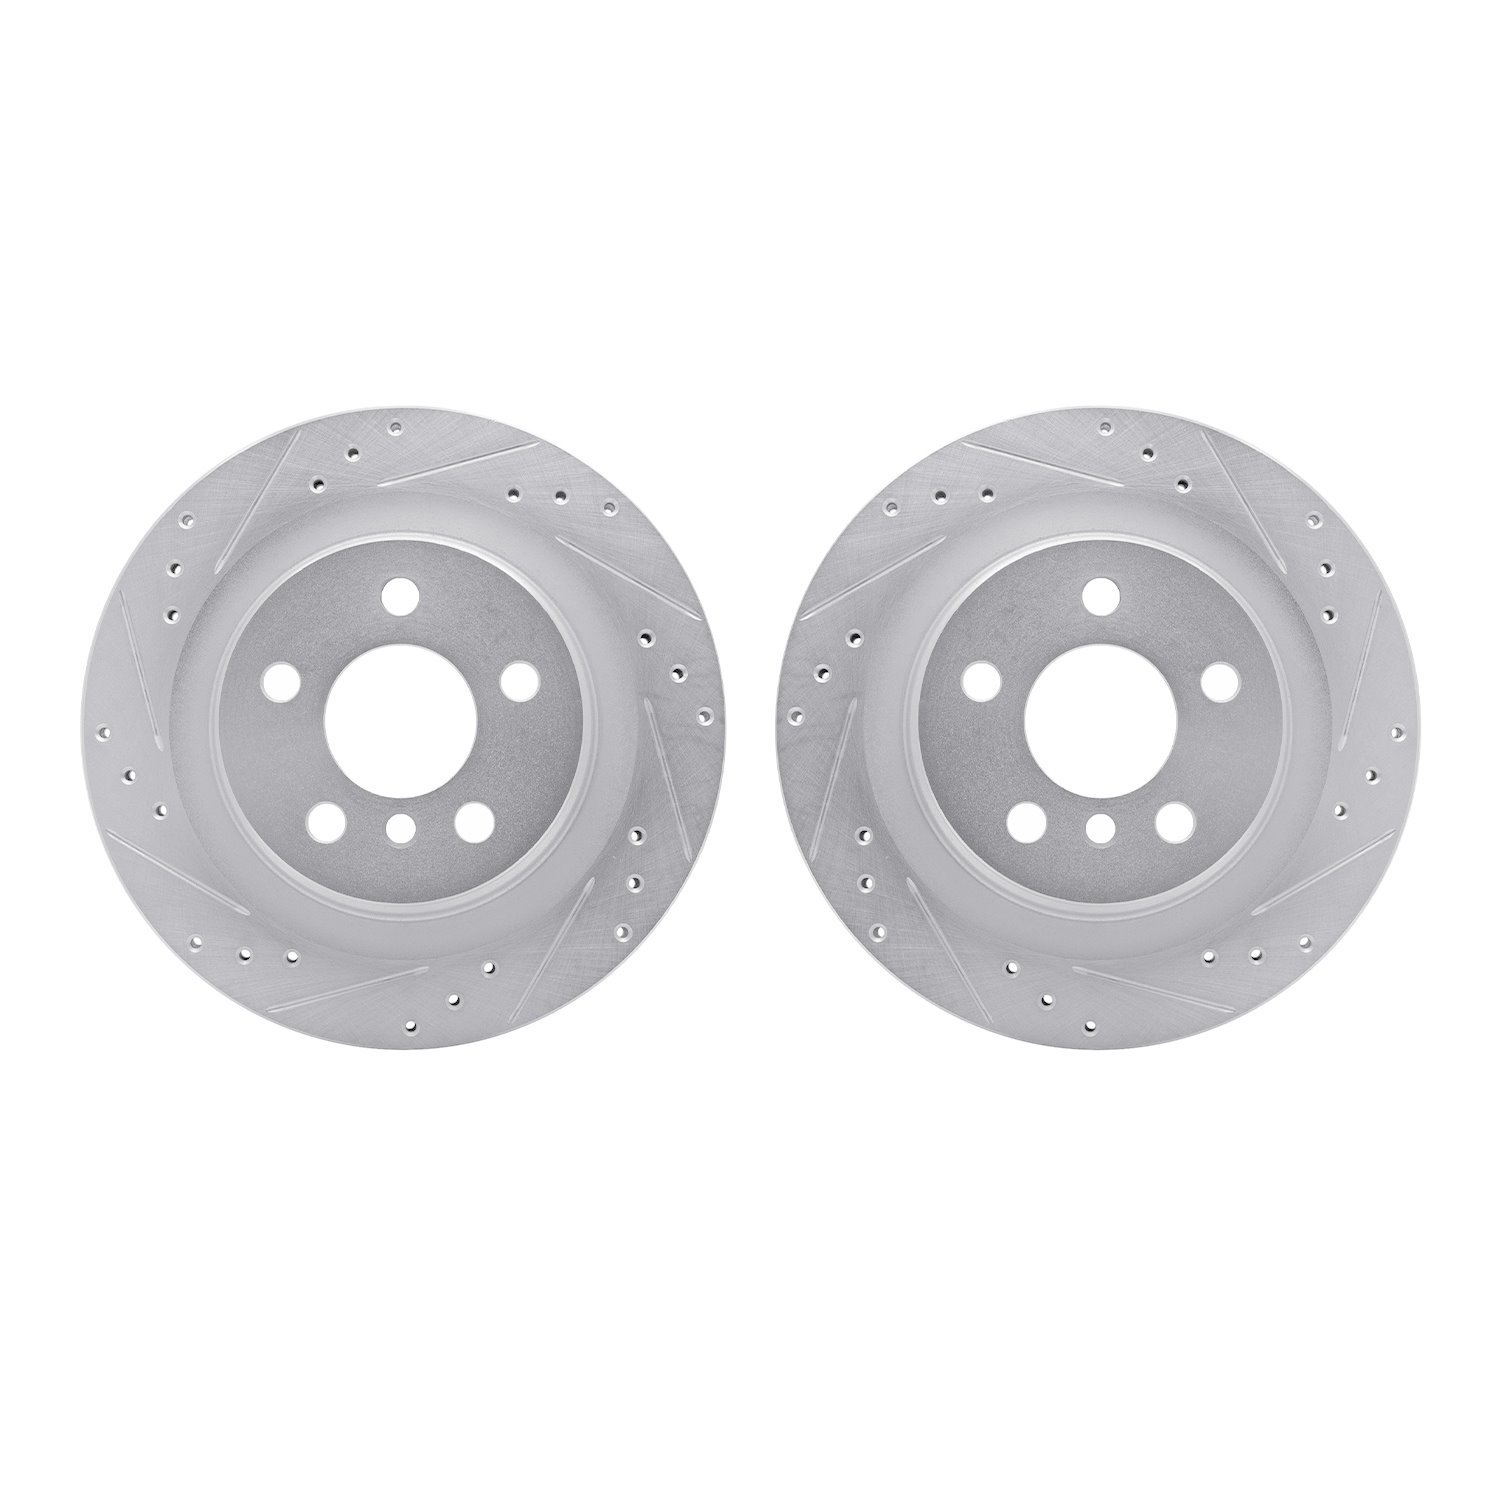 7002-31073 Drilled/Slotted Brake Rotors [Silver], Fits Select Multiple Makes/Models, Position: Rear